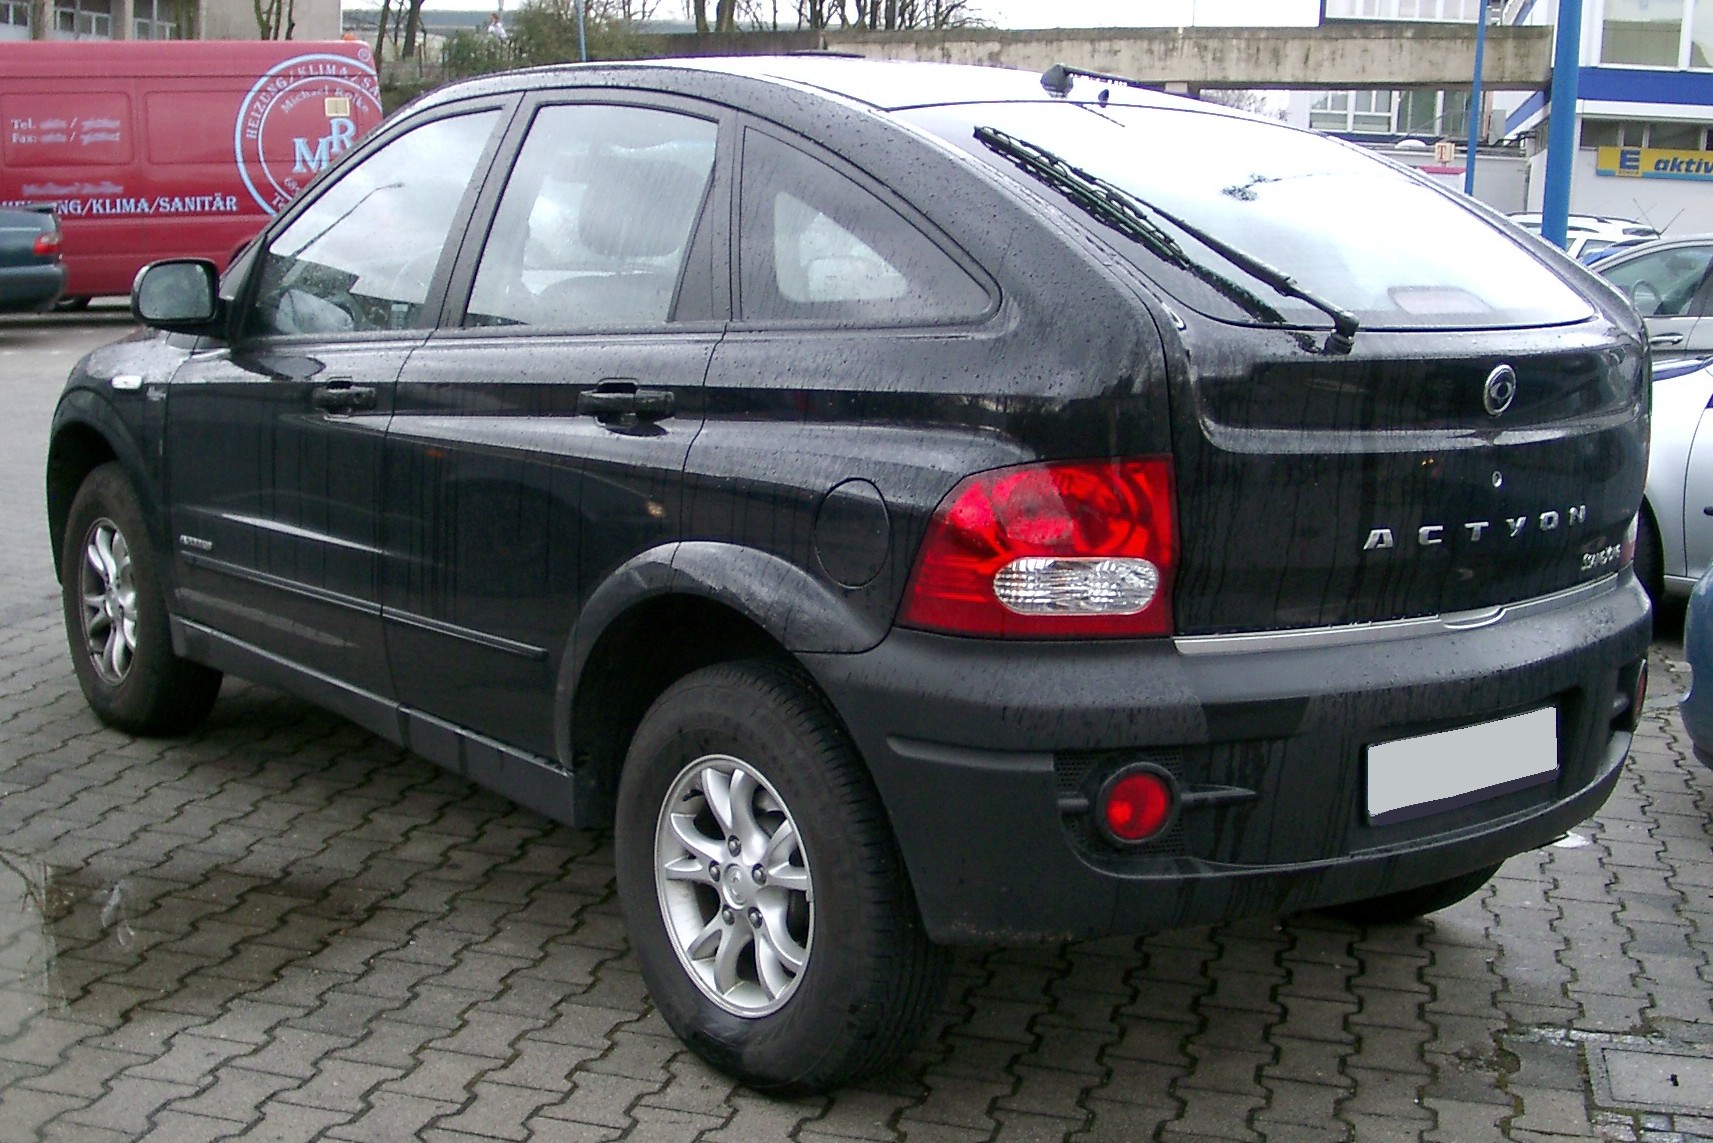 ssangyong actyon-pic. 2